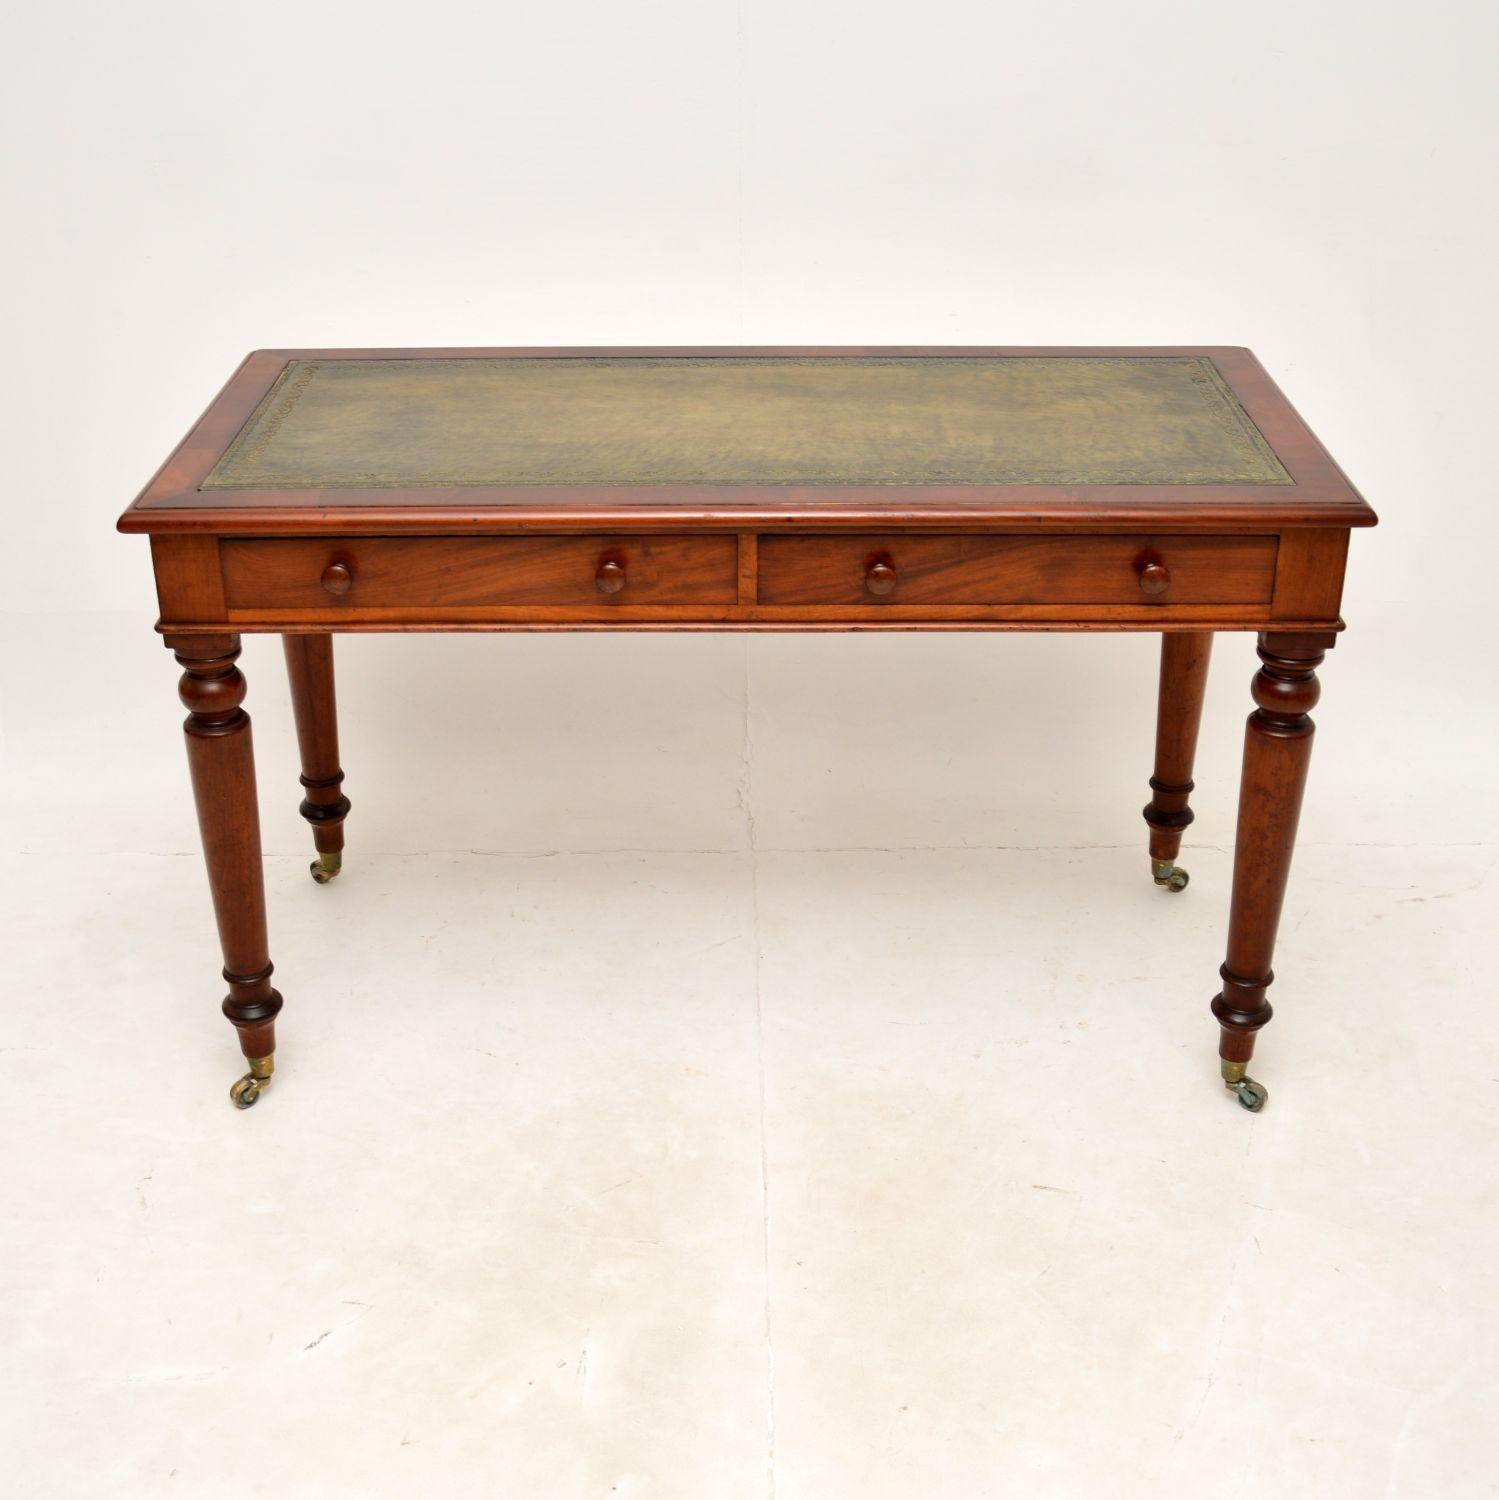 A smart and extremely well made antique Victorian writing table / desk. This was made in England, it dates from around the 1860-1880 period.

It is of superb quality and is a very useful size. The inset leather top is hand coloured with tooled